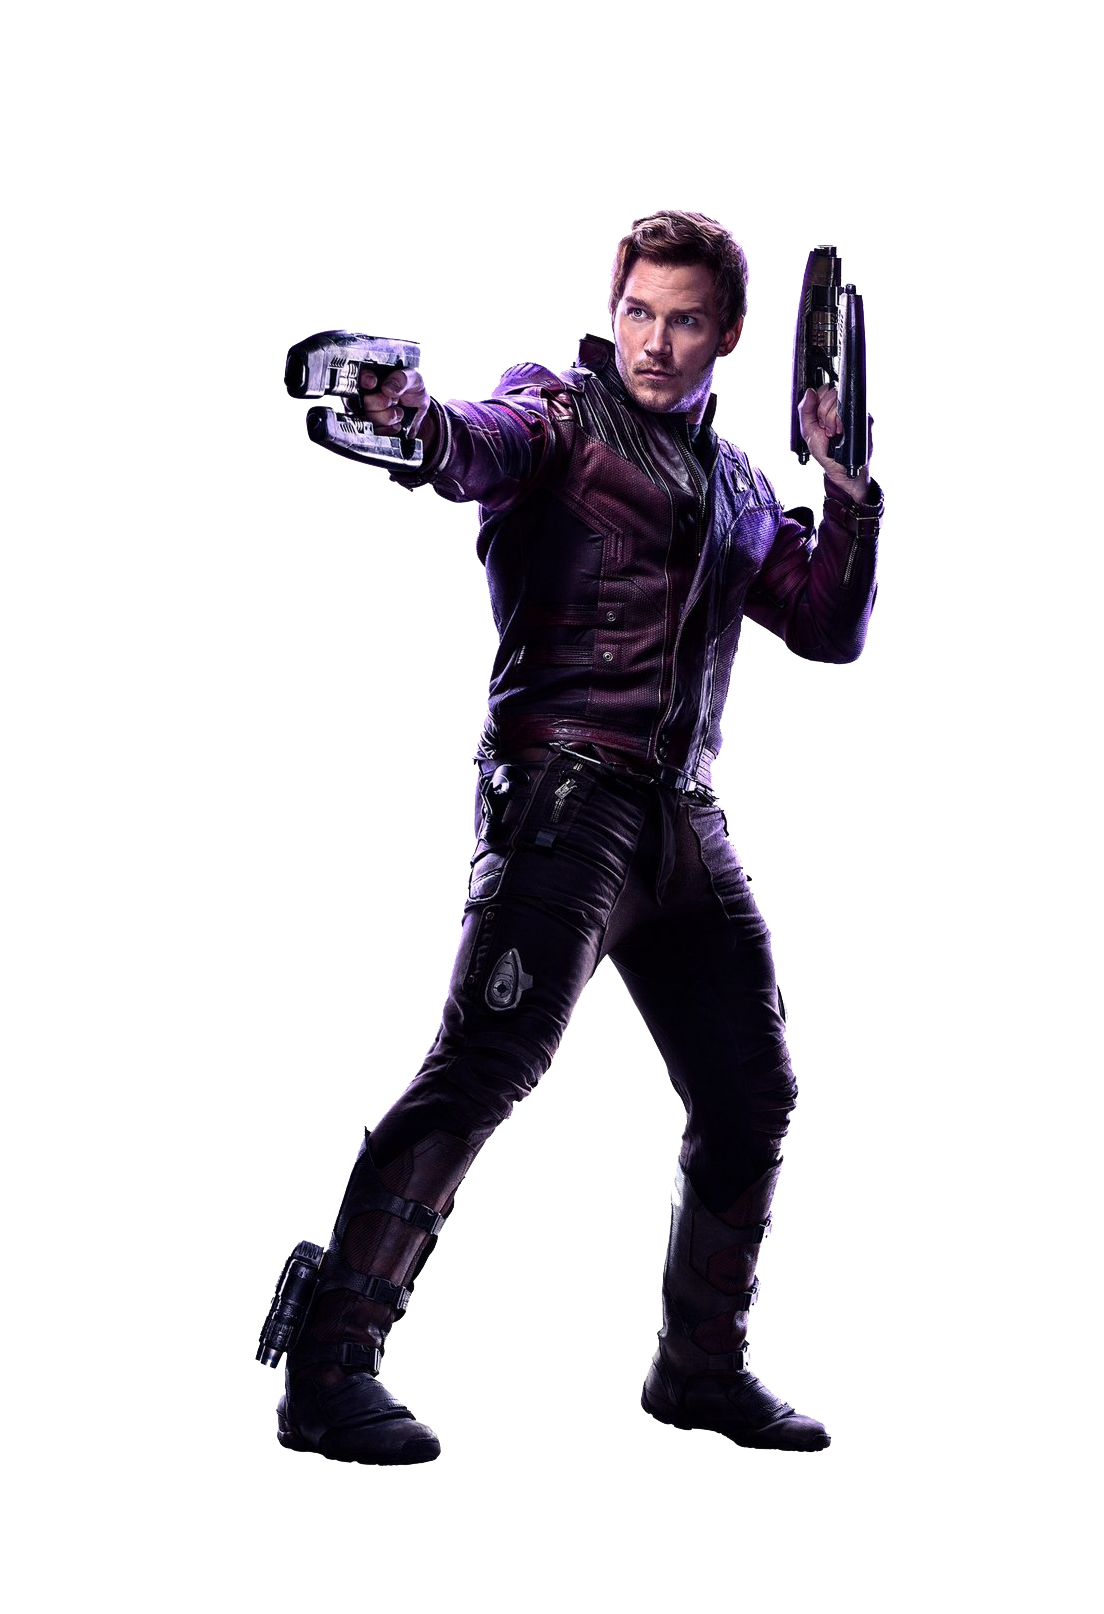 Star Lord PNG Image in Transparent pngteam.com